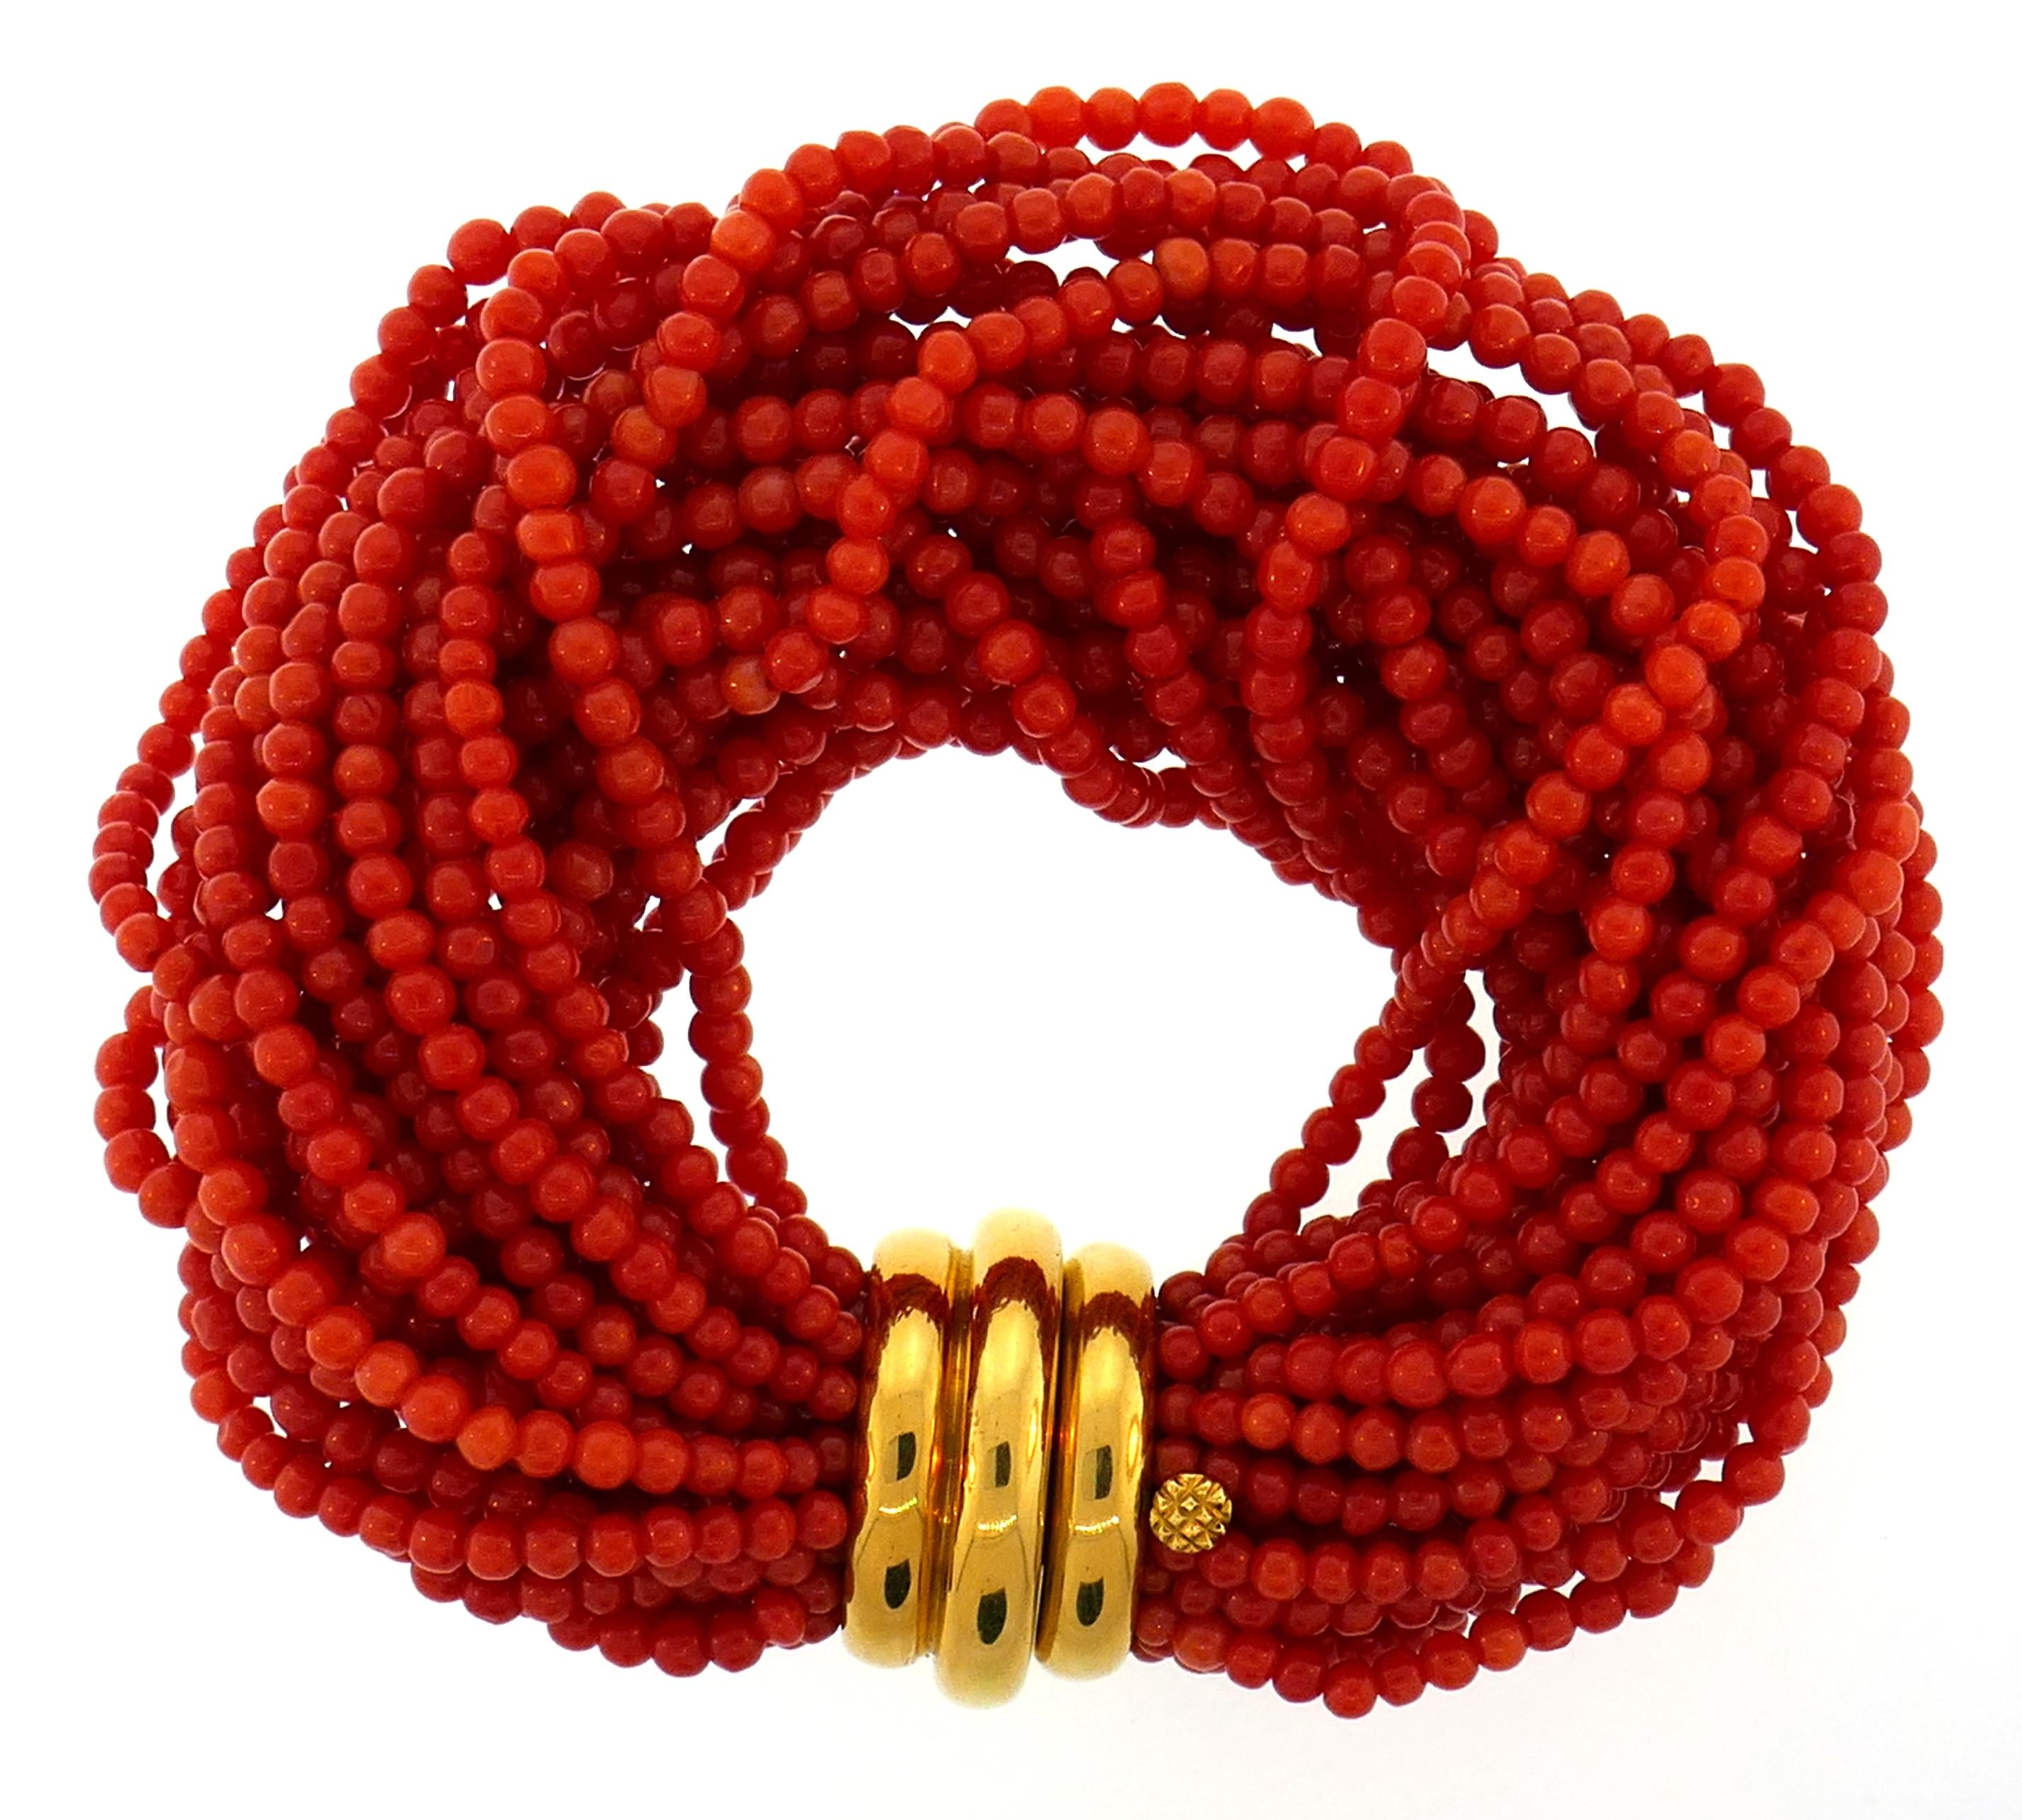 Lovely bracelet created by Verdura in the 2000s. 
The bracelet is made of coral bead strands finished with an 18 karat (stamped) yellow gold clasp.
The bracelet measures 7-3/4 x 1-1/4 inches (19.5 x 3.5 centimeters) and fits up to 6-1/4-inch